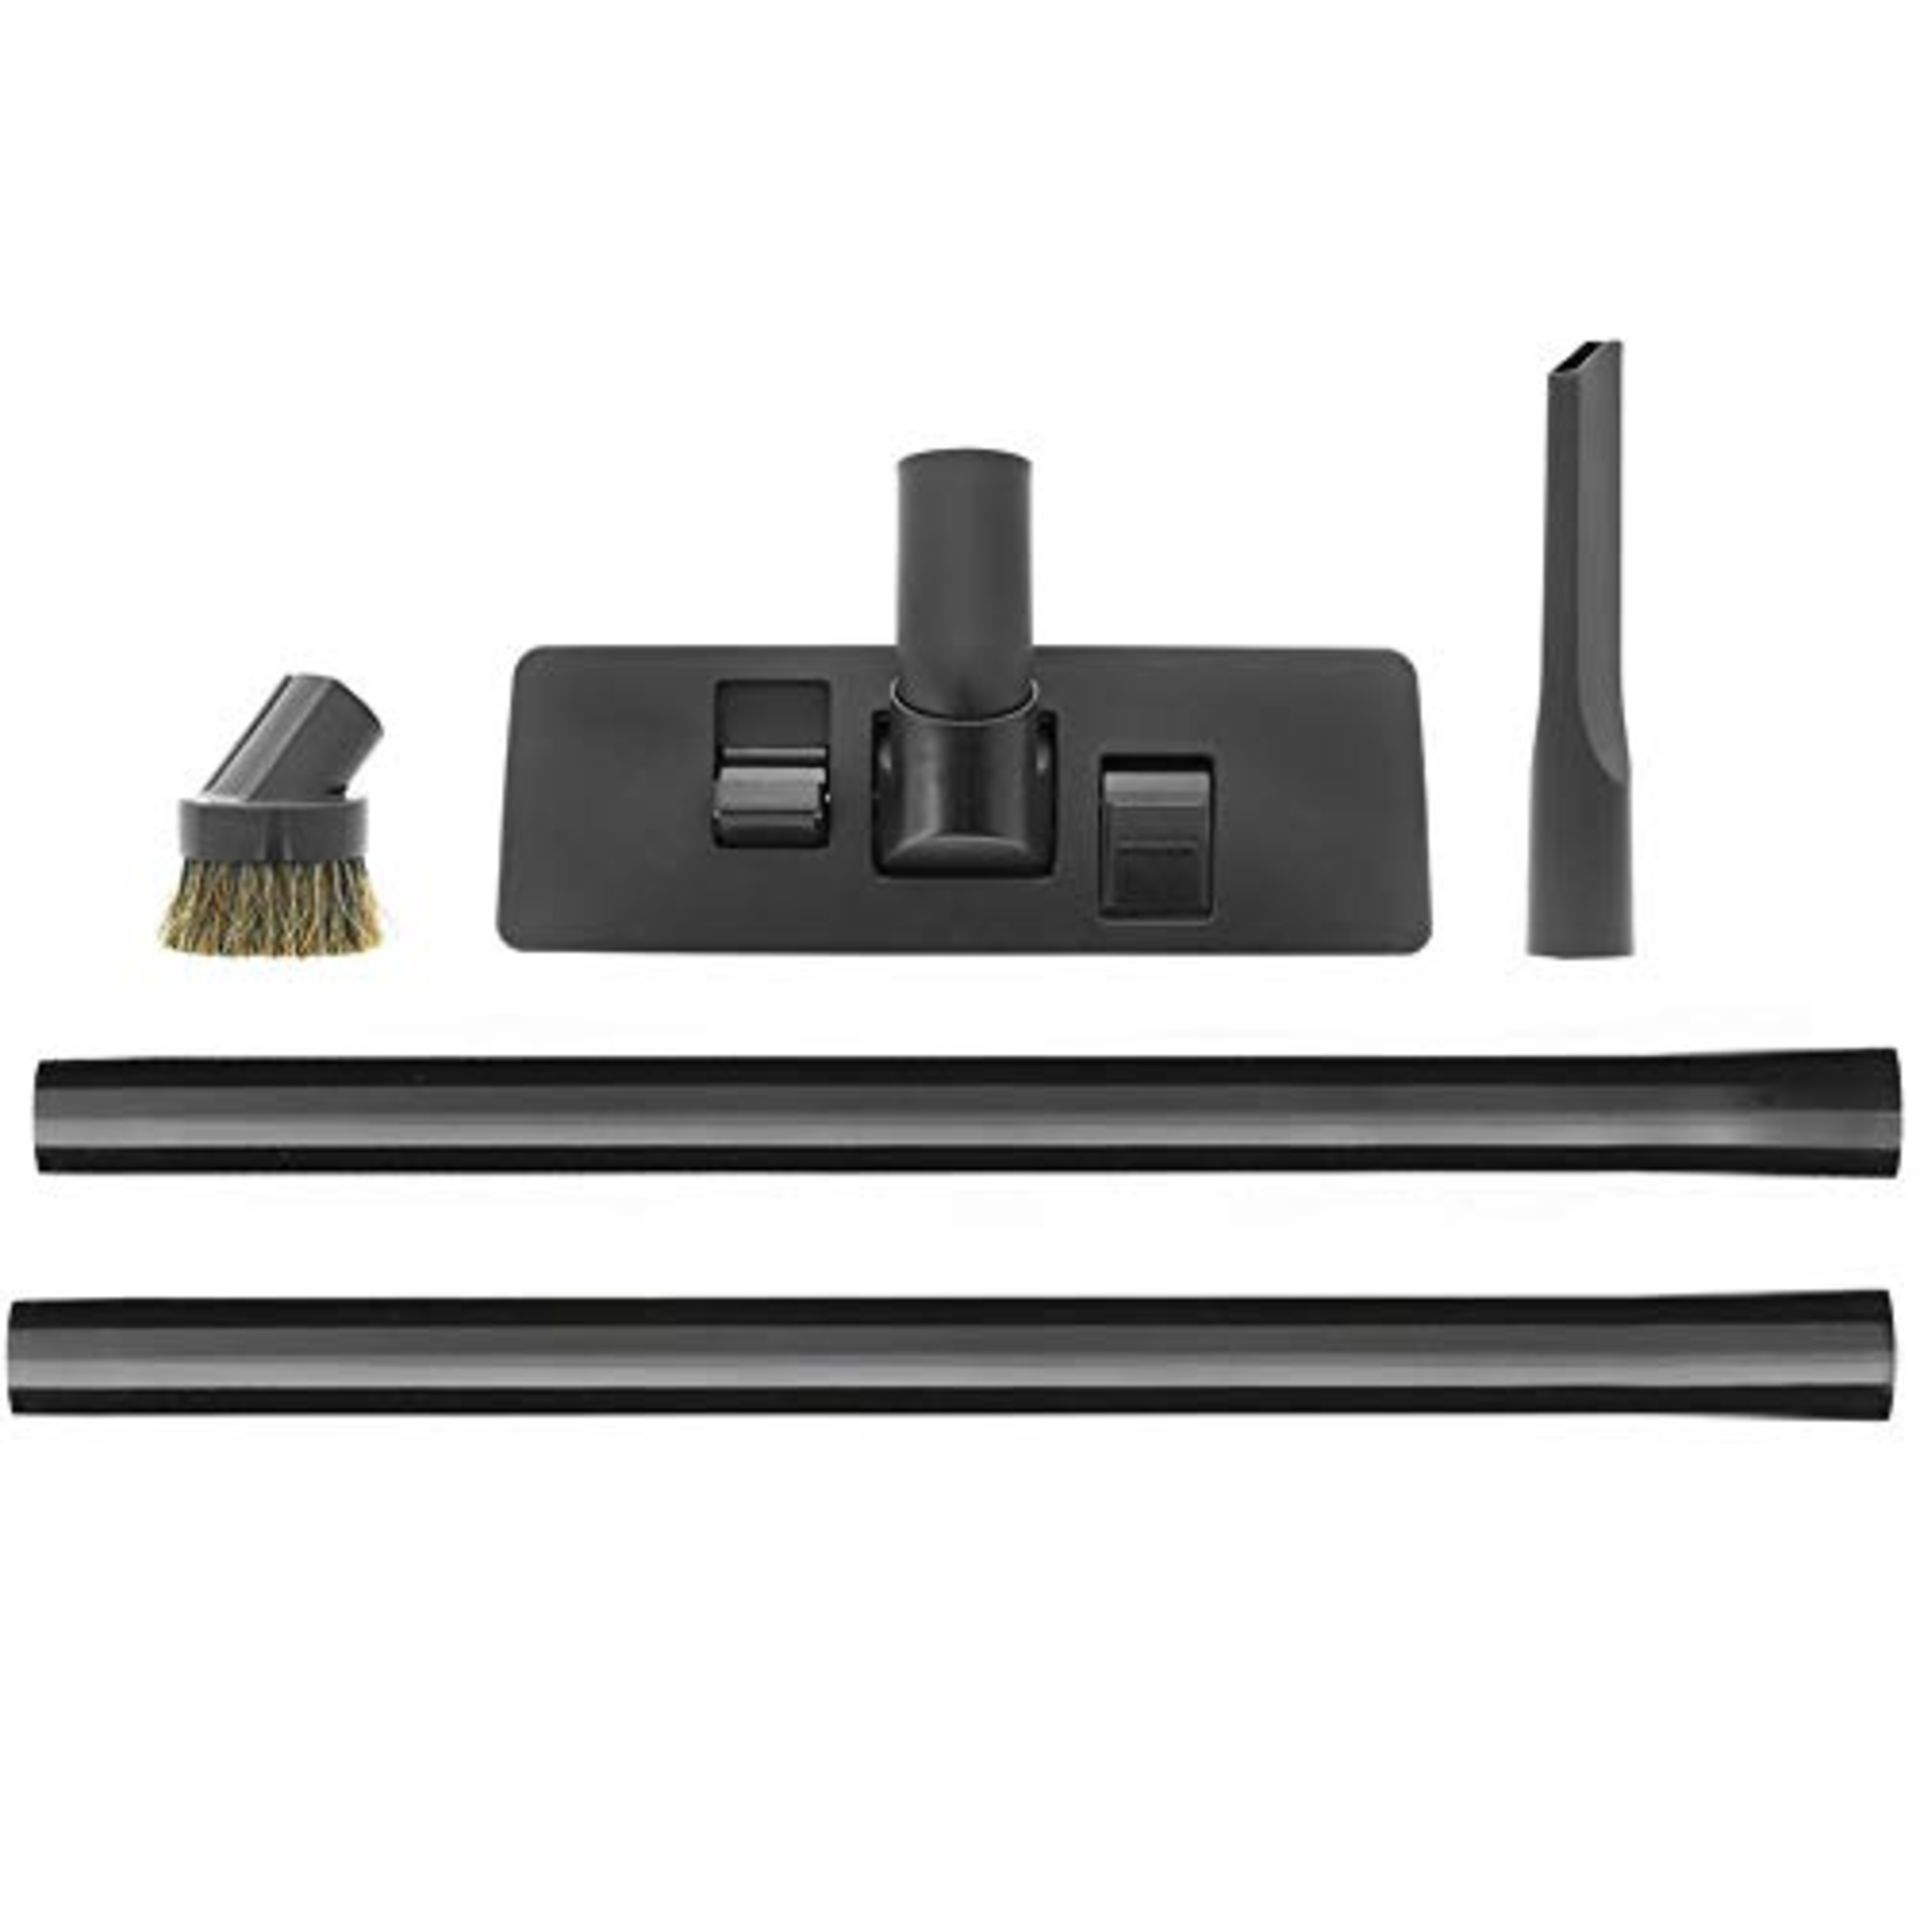 RRP £72.80 Total, Lot Consisting of 5 Items - See Description. - Image 3 of 3